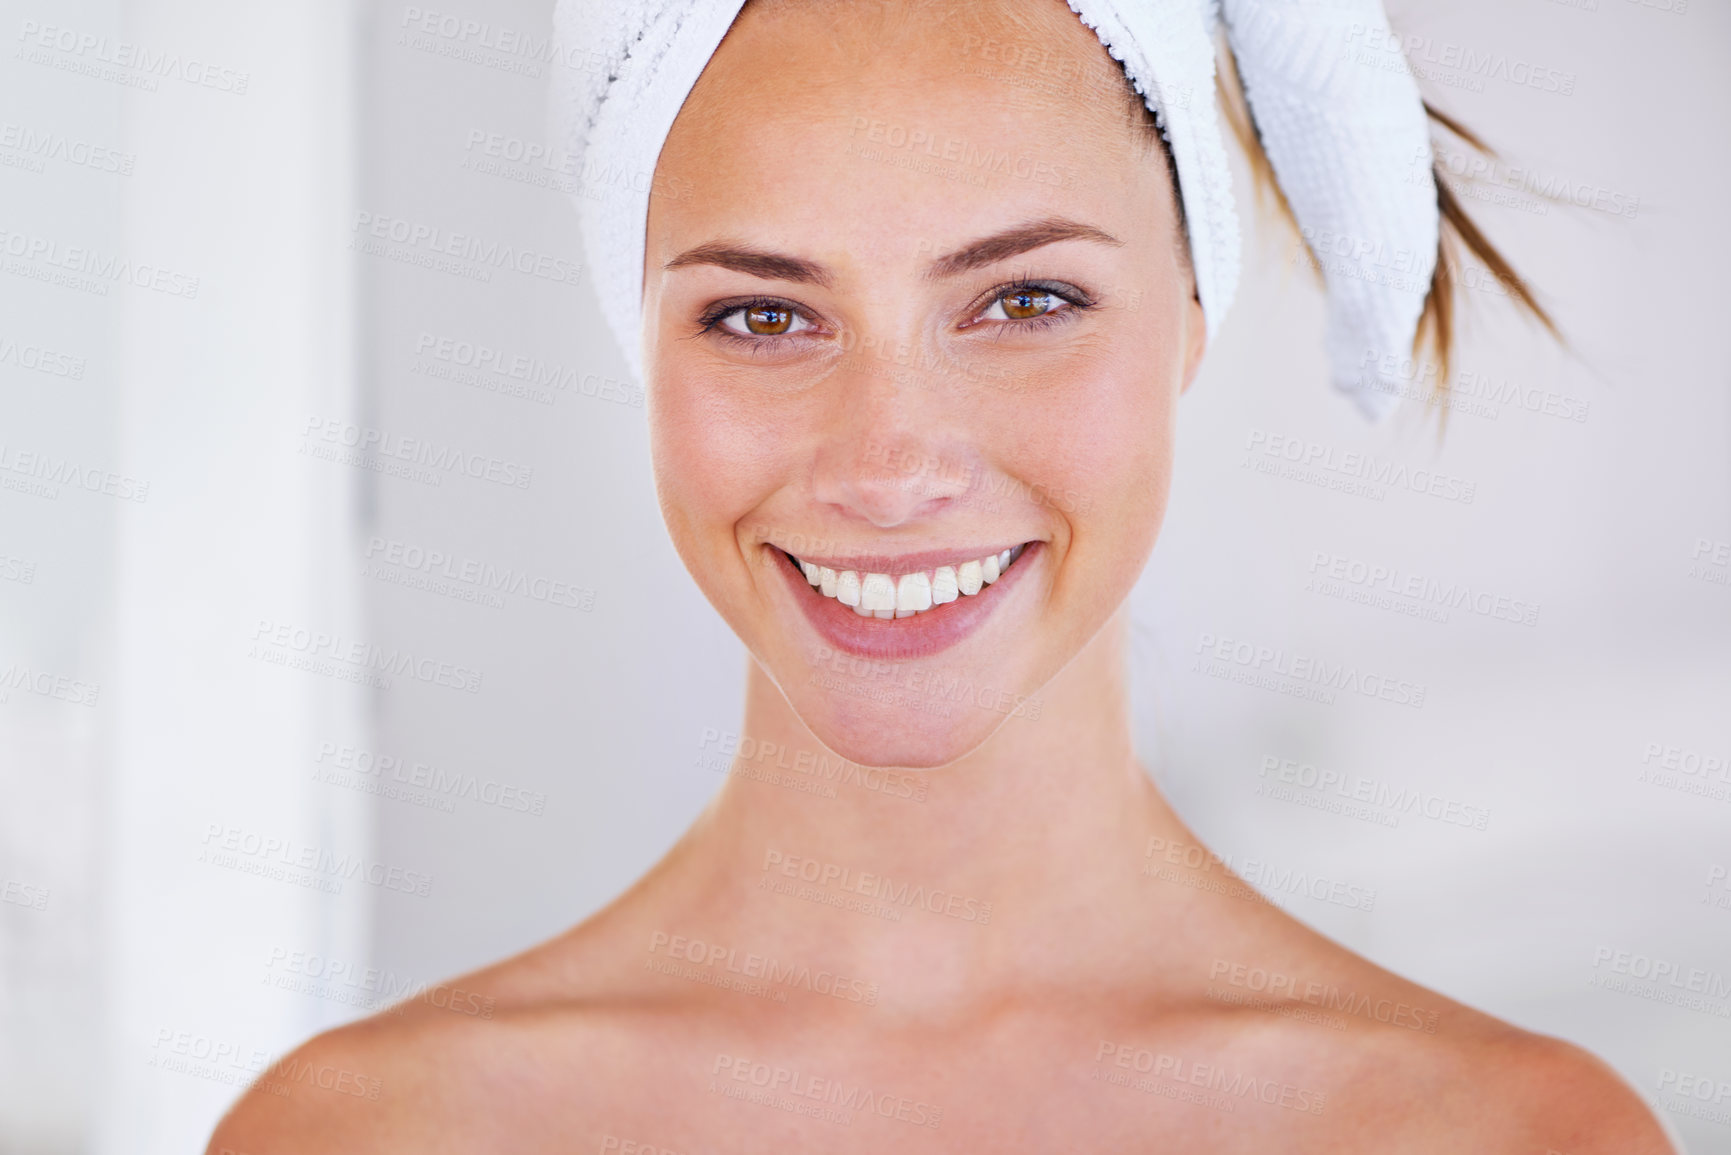 Buy stock photo Head and shoulder shot of a stunning woman with a flawless complexion